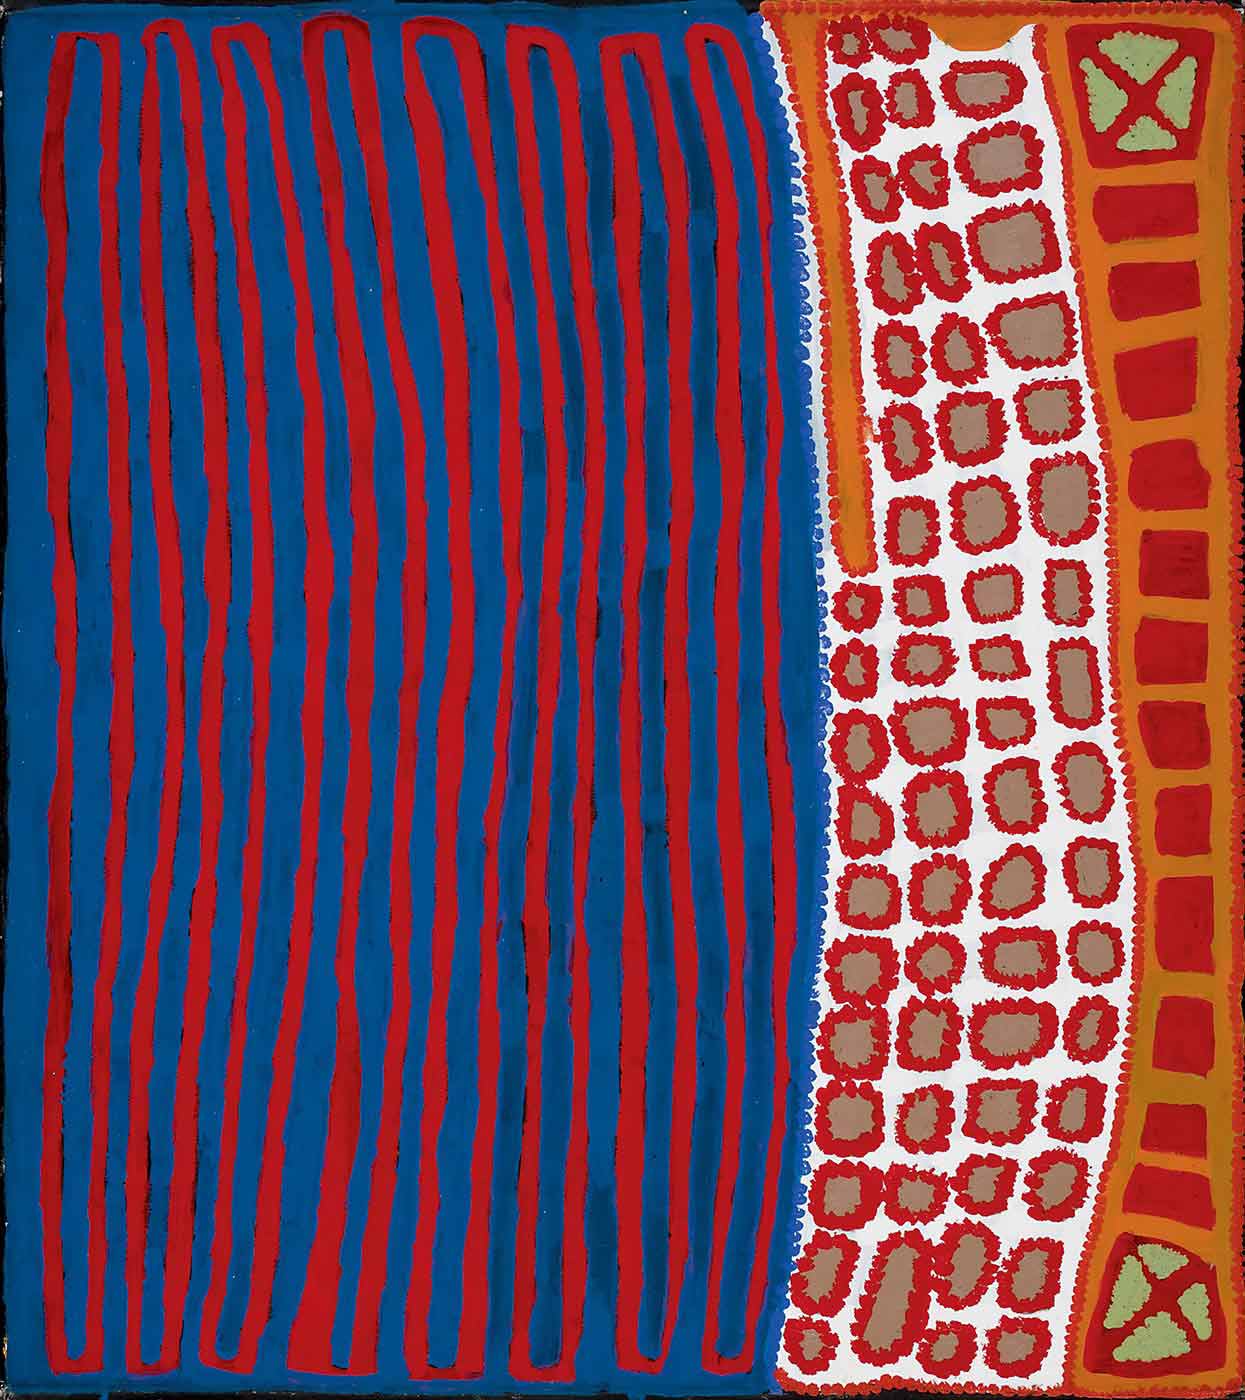 A painting on canvas with a vertical blue and red stripe-like section on the left, and vertical lines of squares on the right. The left side of the painting has long thin oblong outlines in red on a blue background. The middle of the painting has three and a half vertical lines of grey squares outlined with red dots on a white background On the right there is a vertical line of red squares on an orange background with a green square decorated with a red 